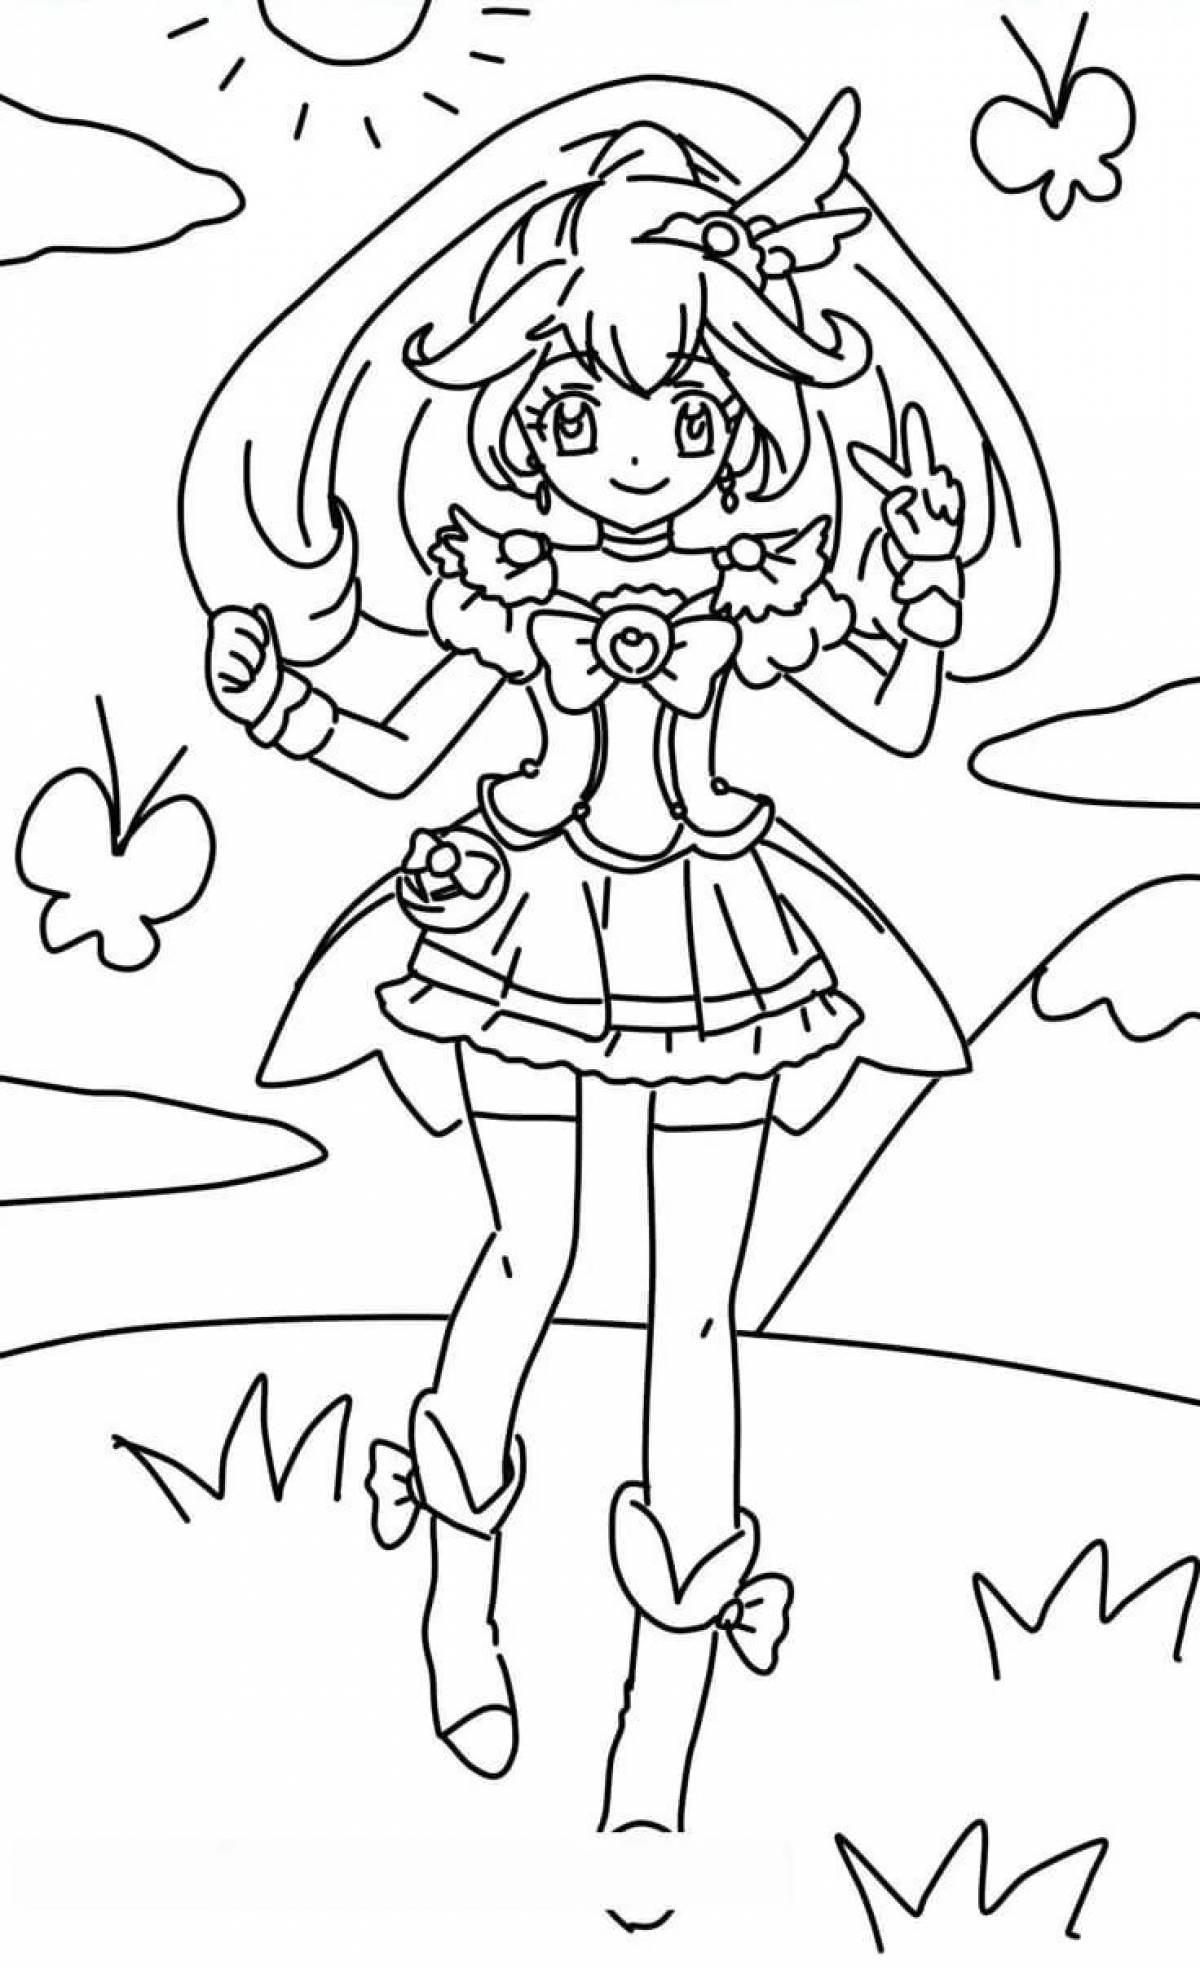 Rainbow power coloring page